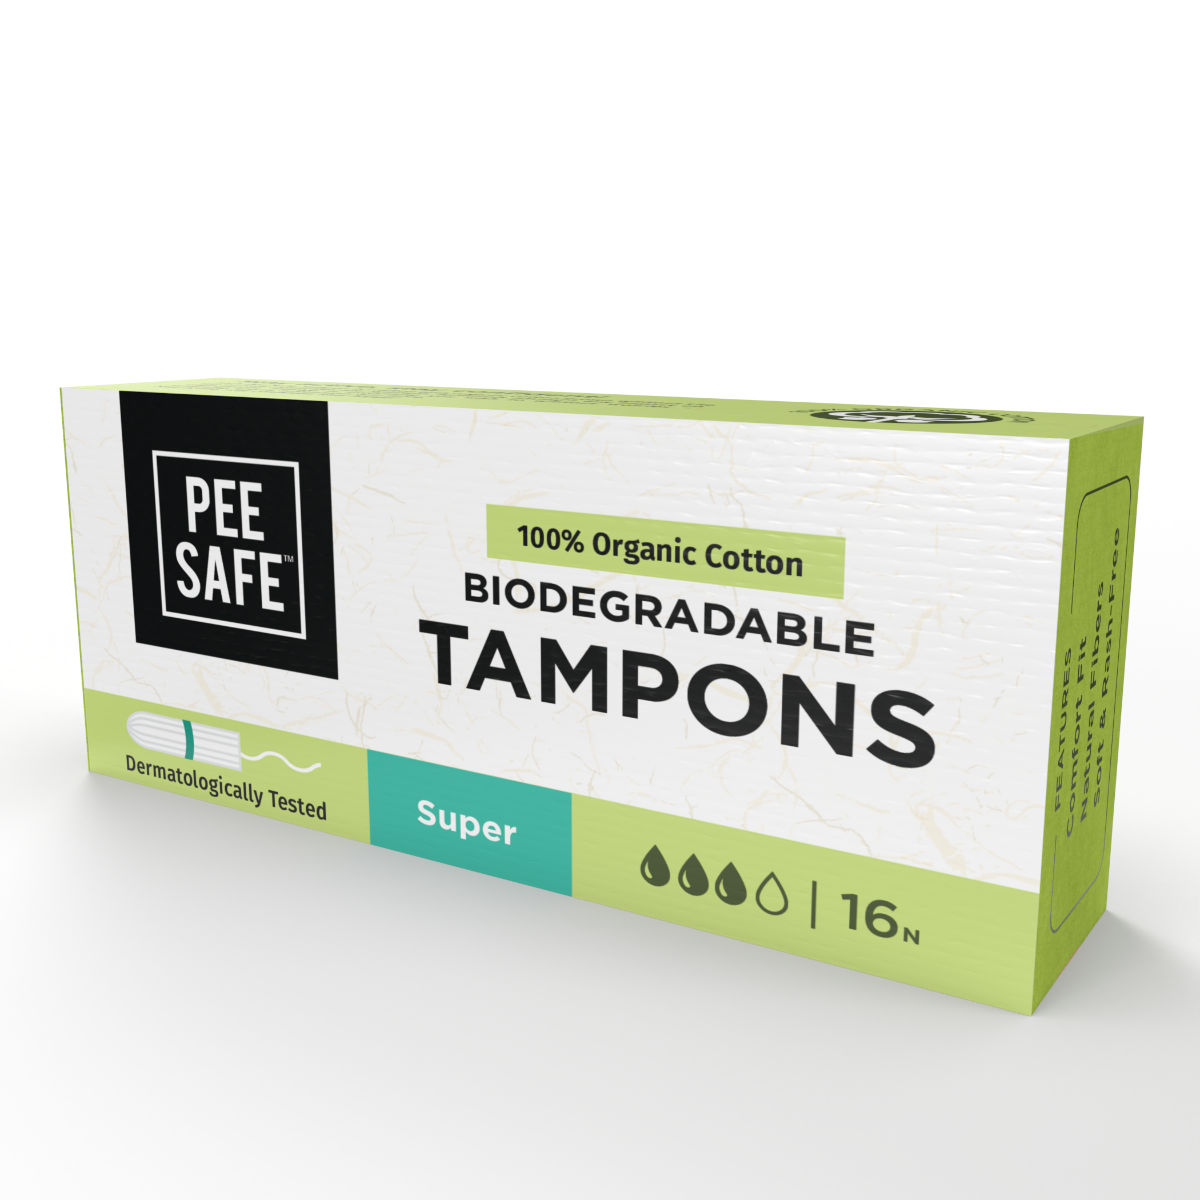 Pee Safe 100% Organic Cotton Biodegradable Super Tampons, 16 Count, Pack of 1 